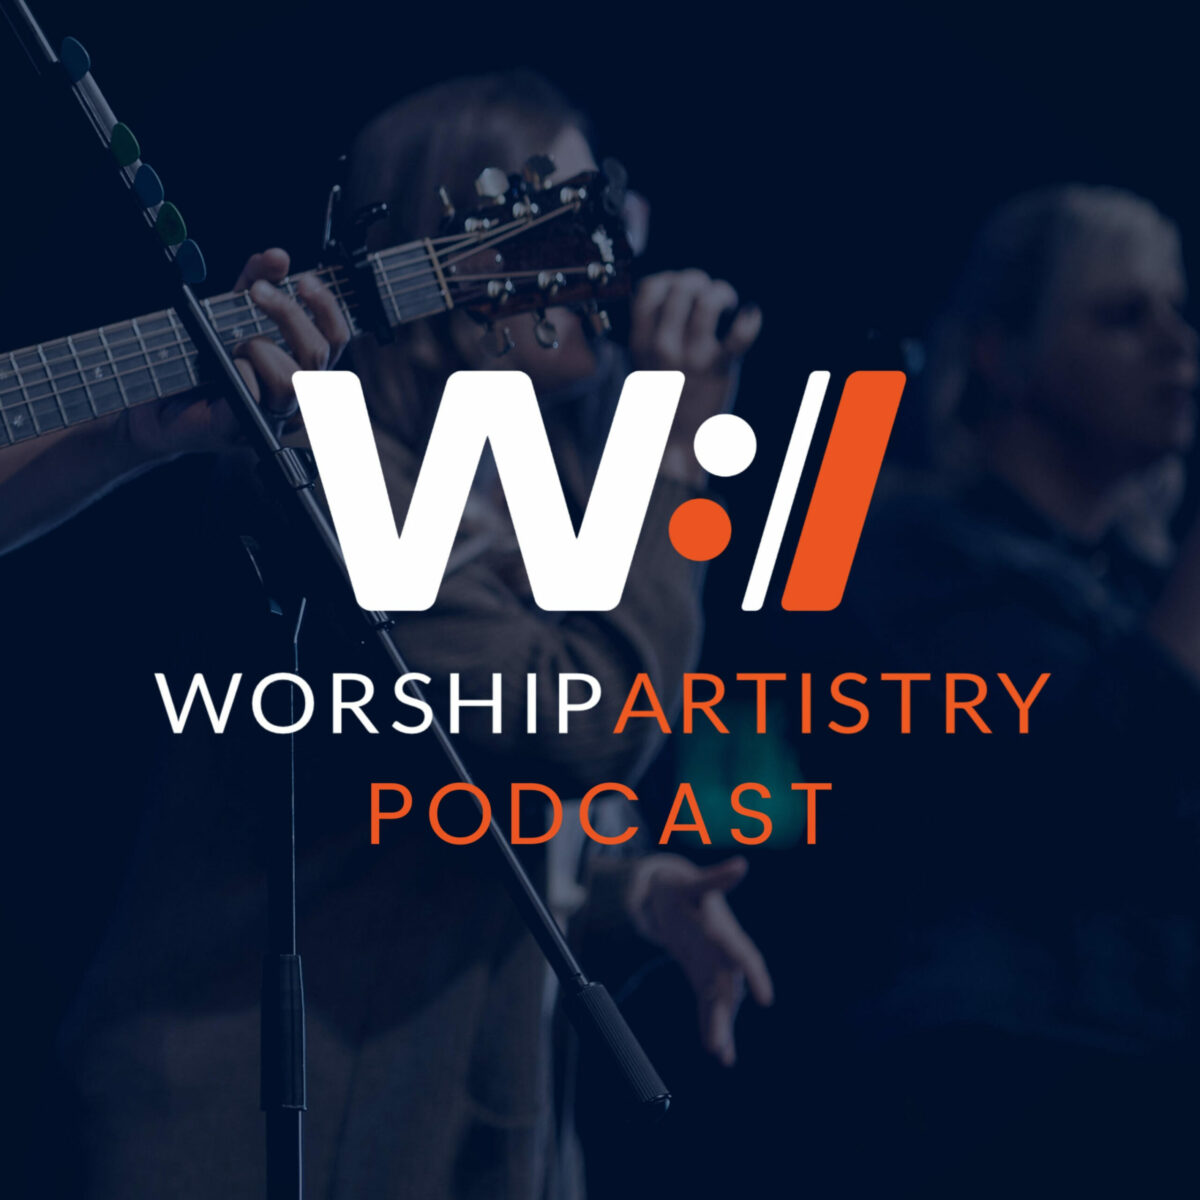 Worship Artistry Podcast Crafting Recording Experiences with Chris Hoisington